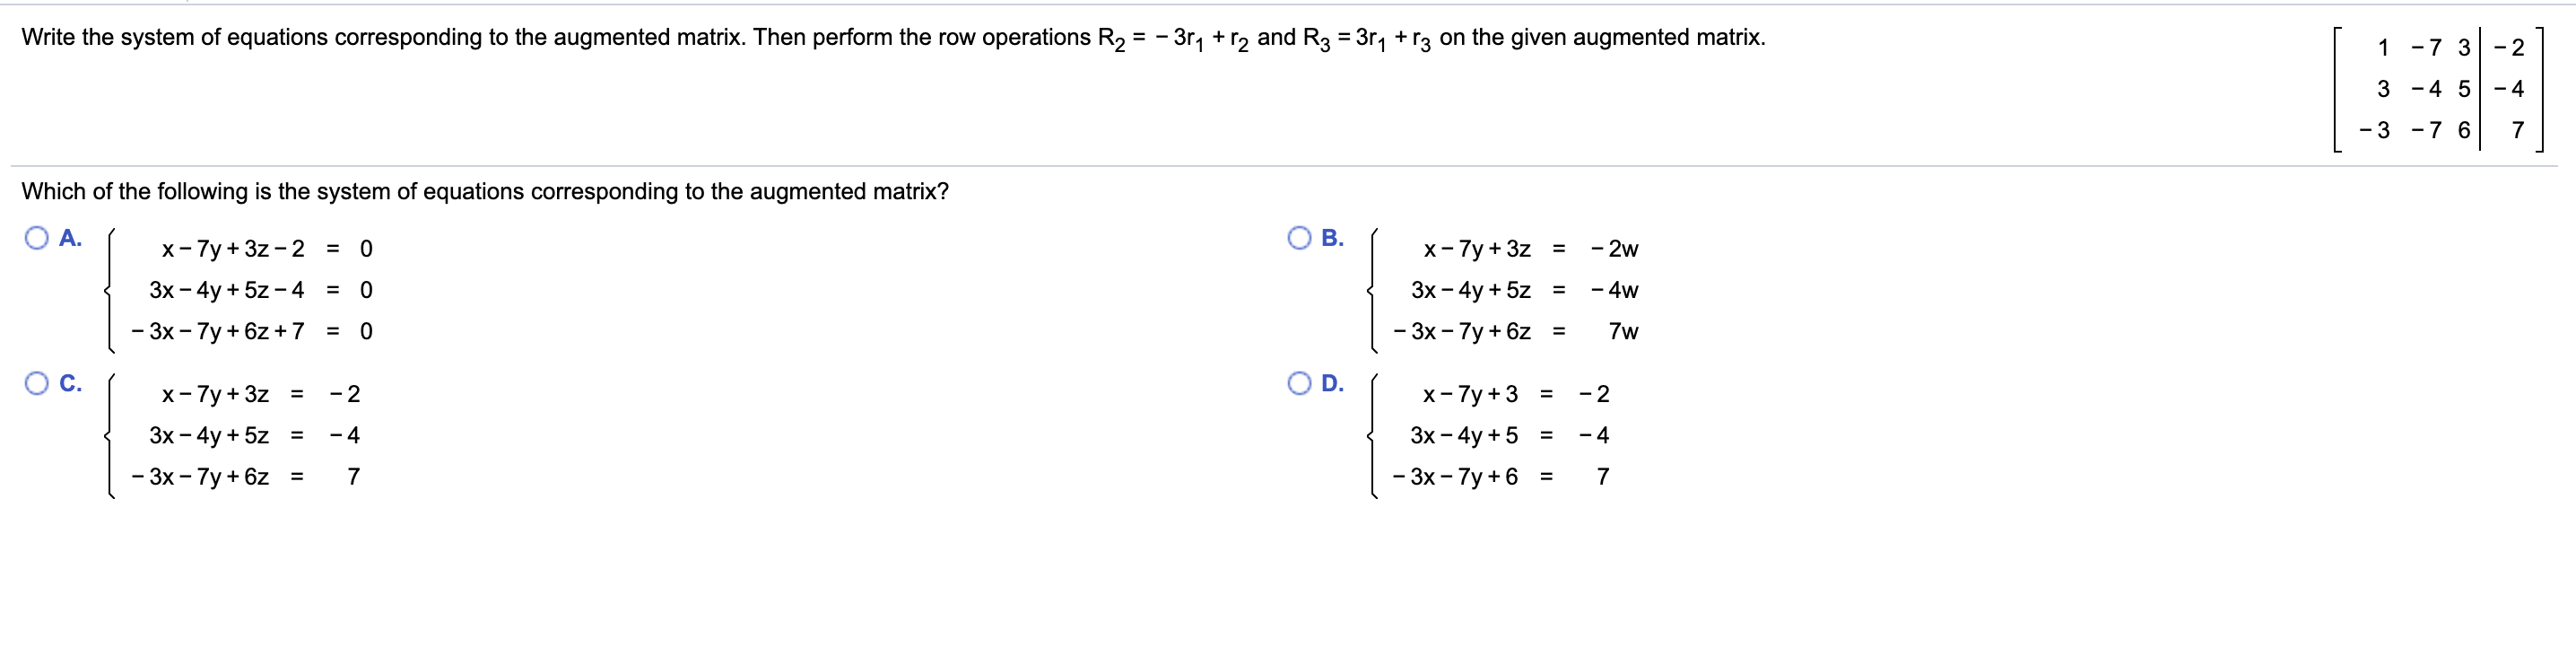 Write the system of equations corresponding to the augmented matrix. Then perform the row operations R2 = - 3r, + r2 and R3 = 3r, +r3 on the given augmented matrix.
1 -7 3
- 2
3 -4 5
- 4
-7 6
- 3
Which of the following is the system of equations corresponding to the augmented matrix?
A.
B.
- 2w
x- 7y + 3z - 2
x- 7y + 3z
=
=
Зх - 4y + 5z-4 %3D
Зх - 4y + 5z
- 4w
%3
=
- 3x - 7y + 6z +7
- 3х - 7у + 6z
7w
%3D
OC.
D.
х-7у + 3z
x- 7y +3 =
- 2
- 2
%3
Зх - 4y +5
Зх- 4y + 5z
- 4
- 4
%3D
%3D
- 3x - 7y +6
- 3х -7у + 6z
=
II
II
